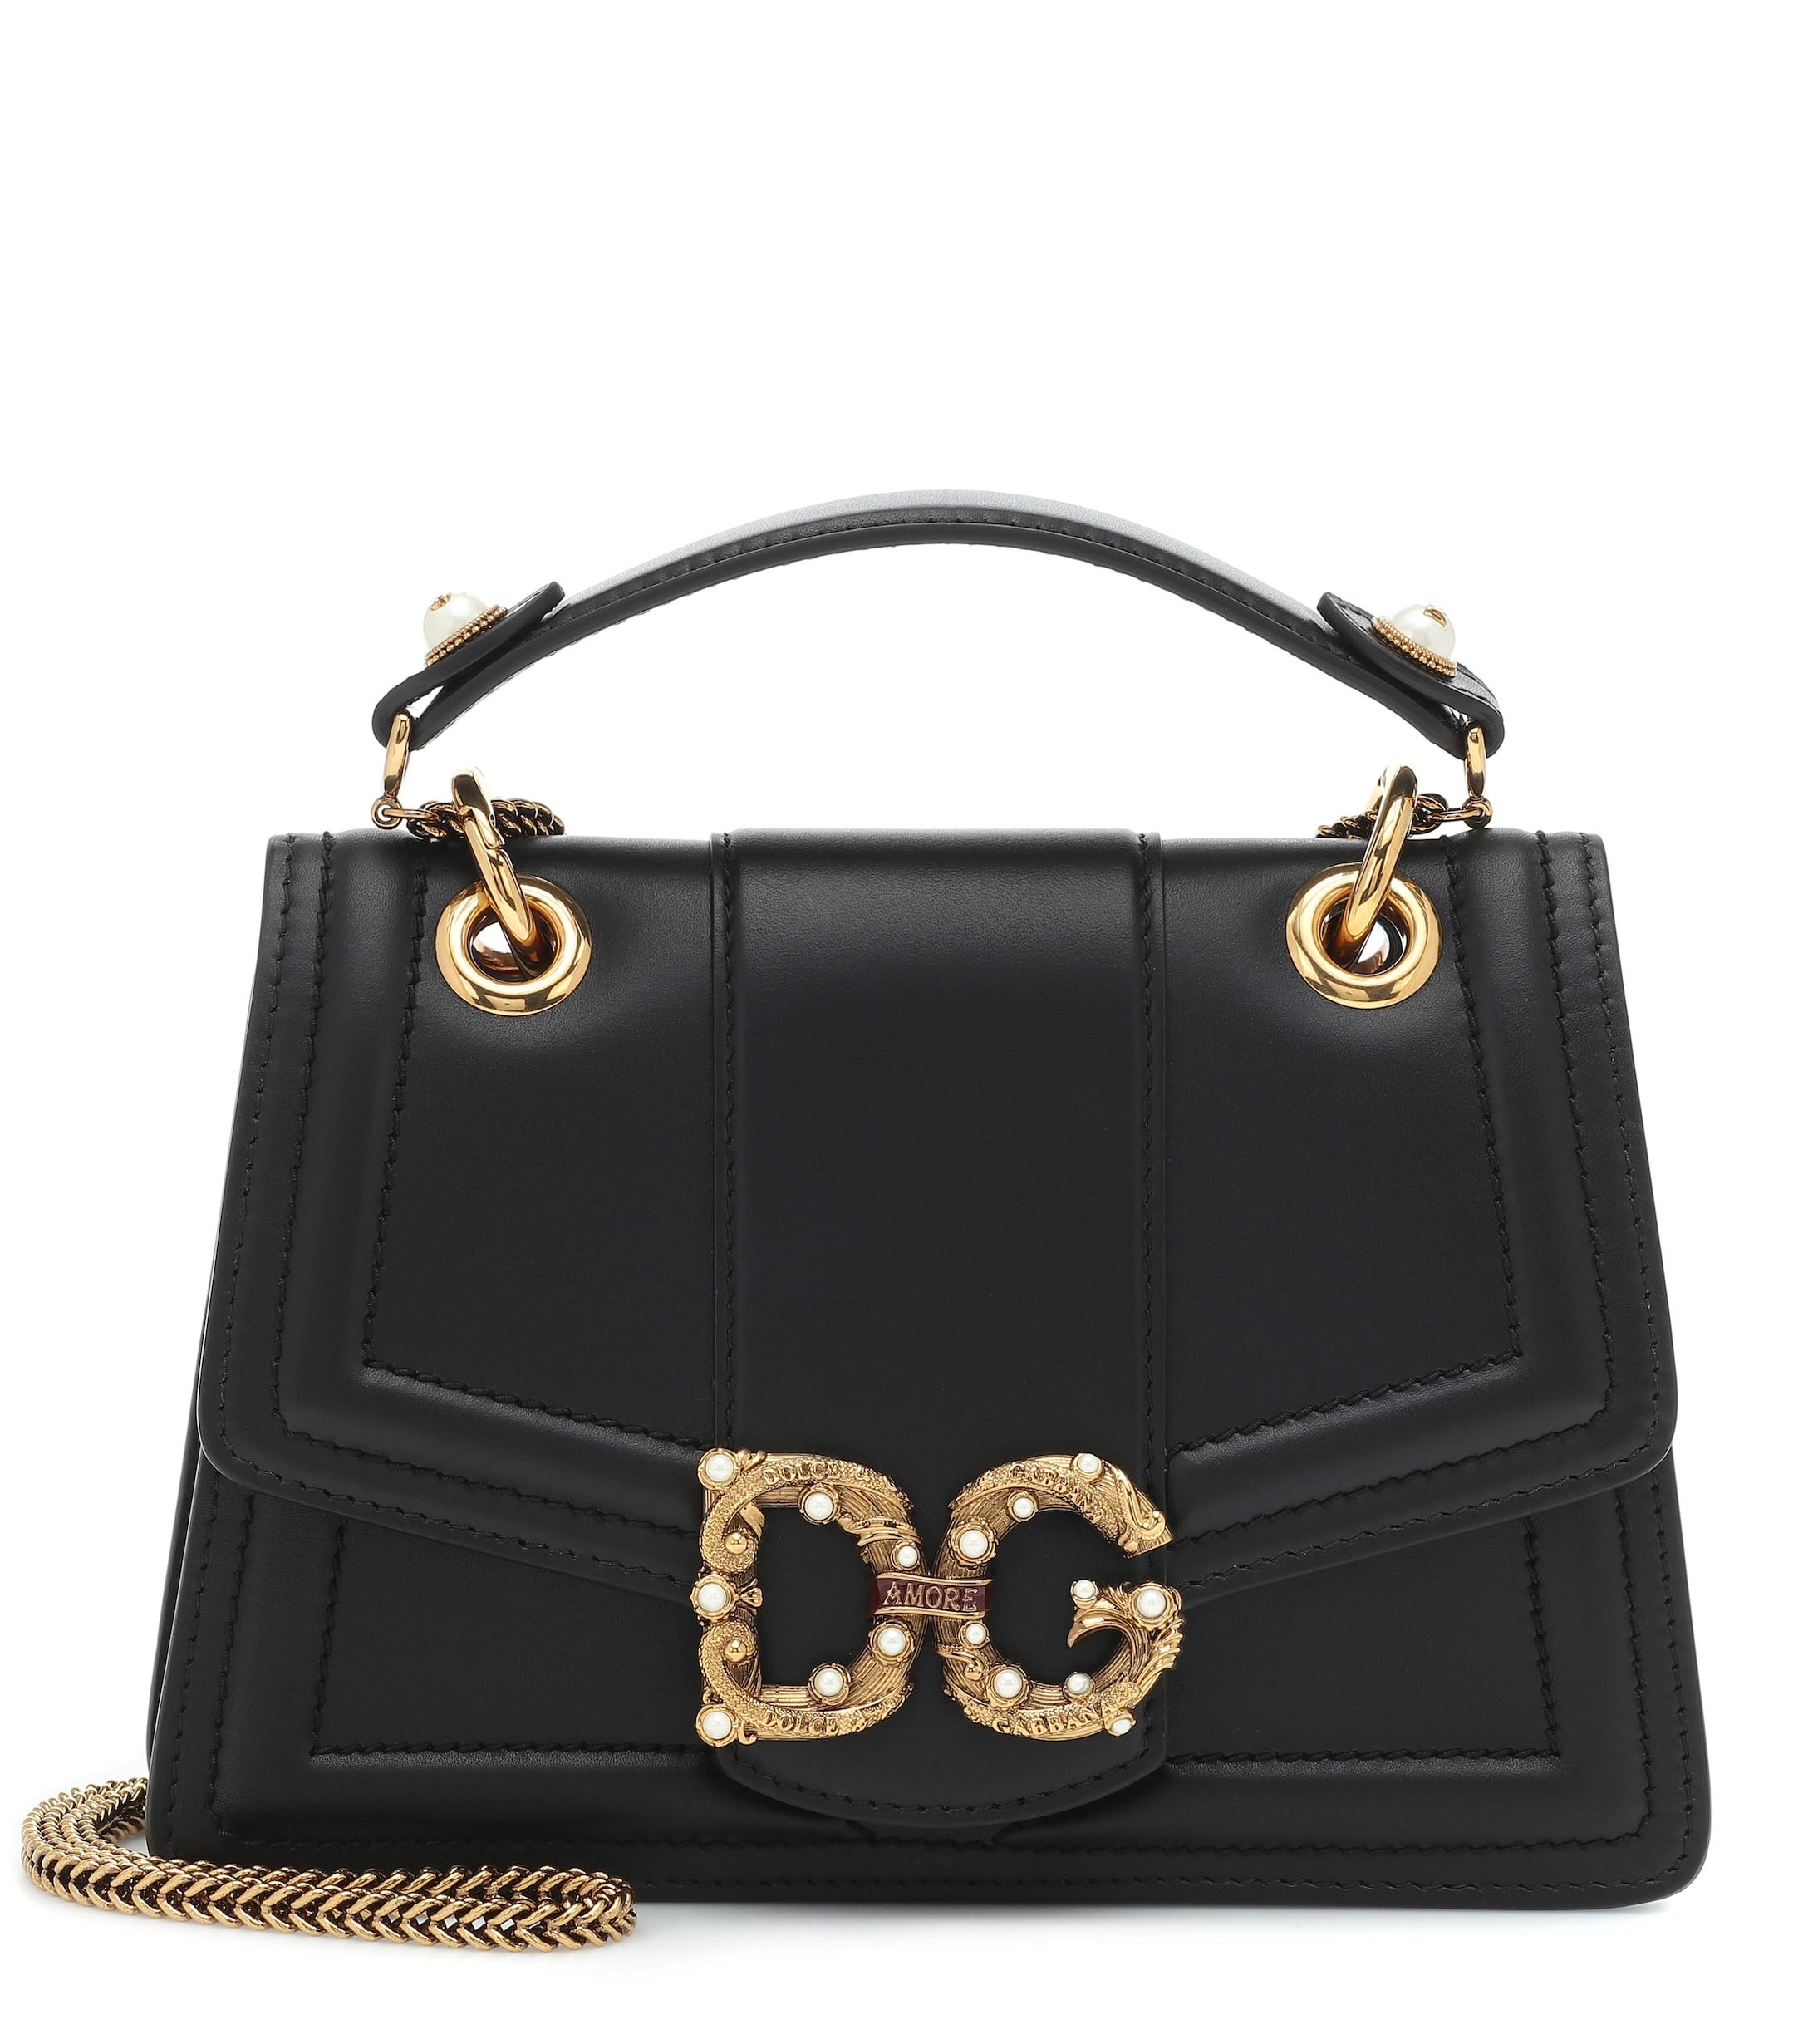 Dolce & Gabbana Leather Small Dg Amore Bag In Calfskin in Black - Lyst